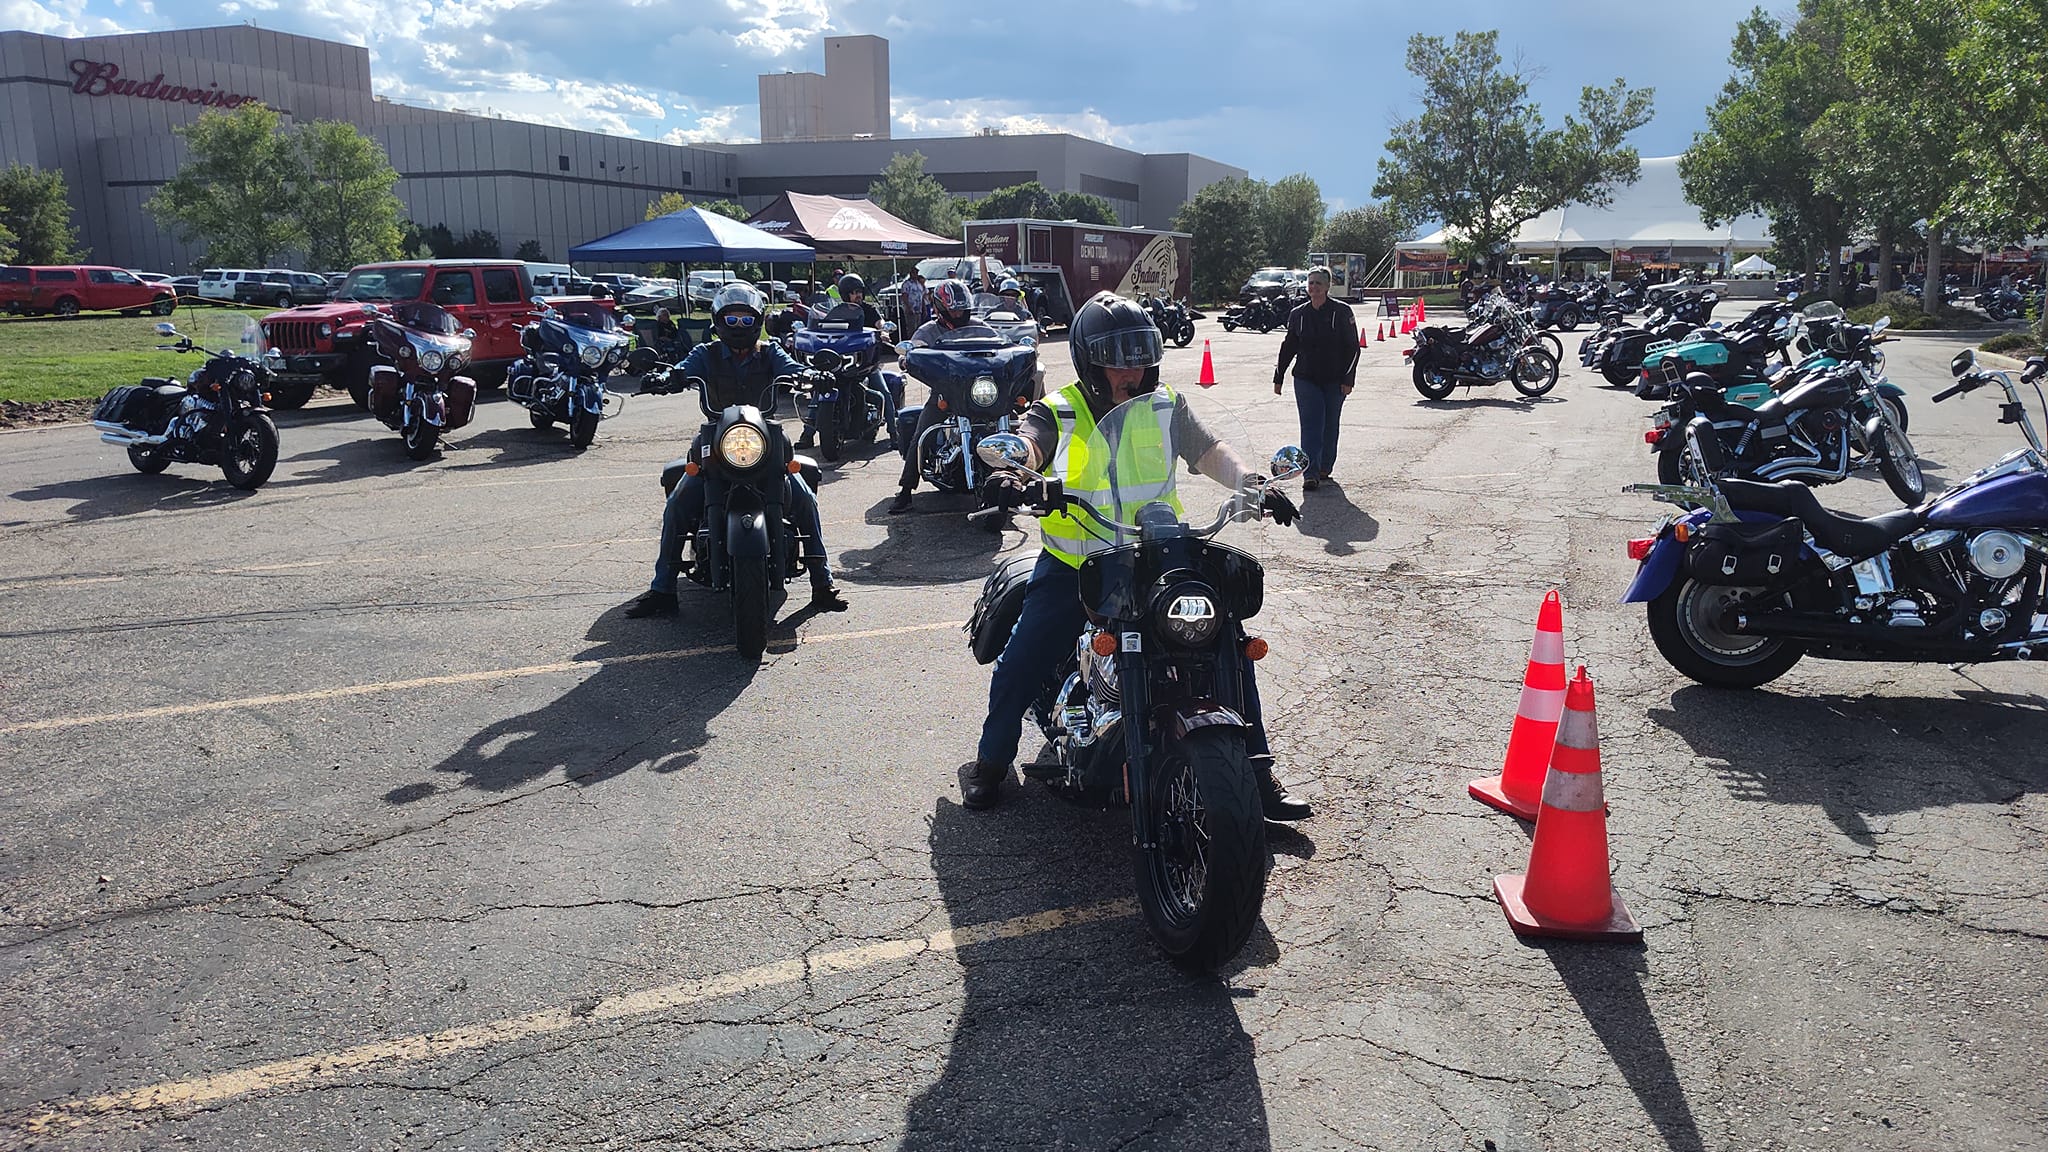 Northern Colorado Indian Motorcycle Riders Group leading rides for demo days